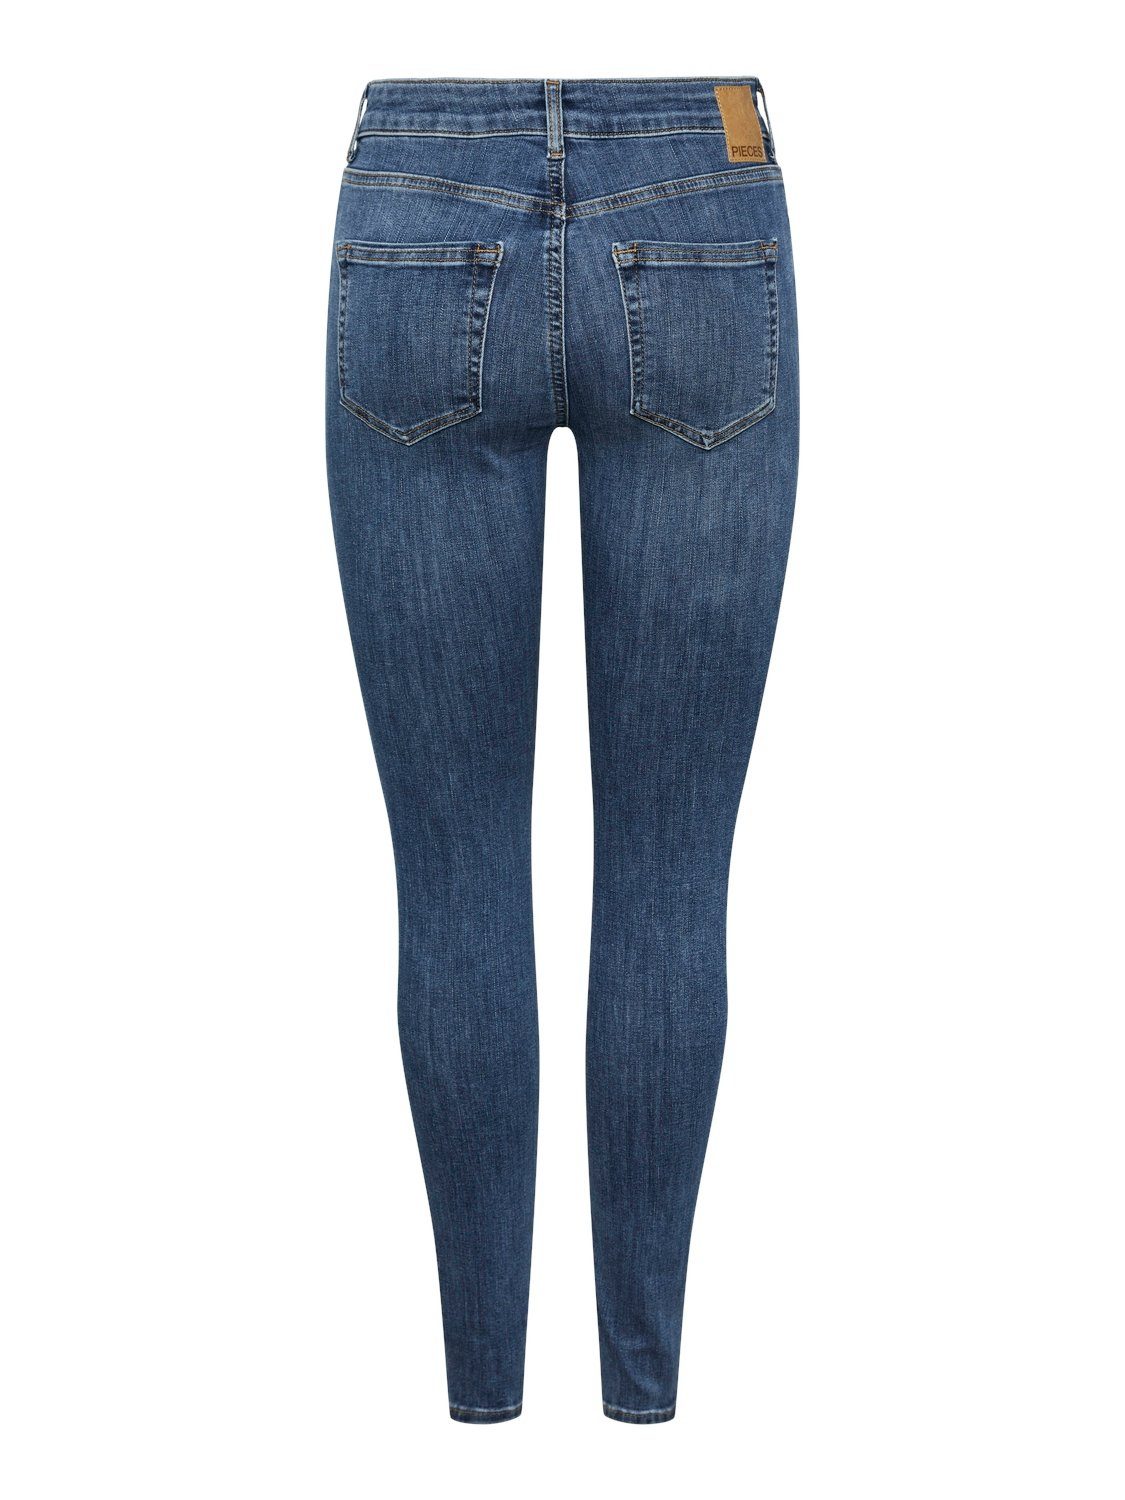 pieces Skinny fit jeans PCDELLY SKN MW MB184 NOOS BC